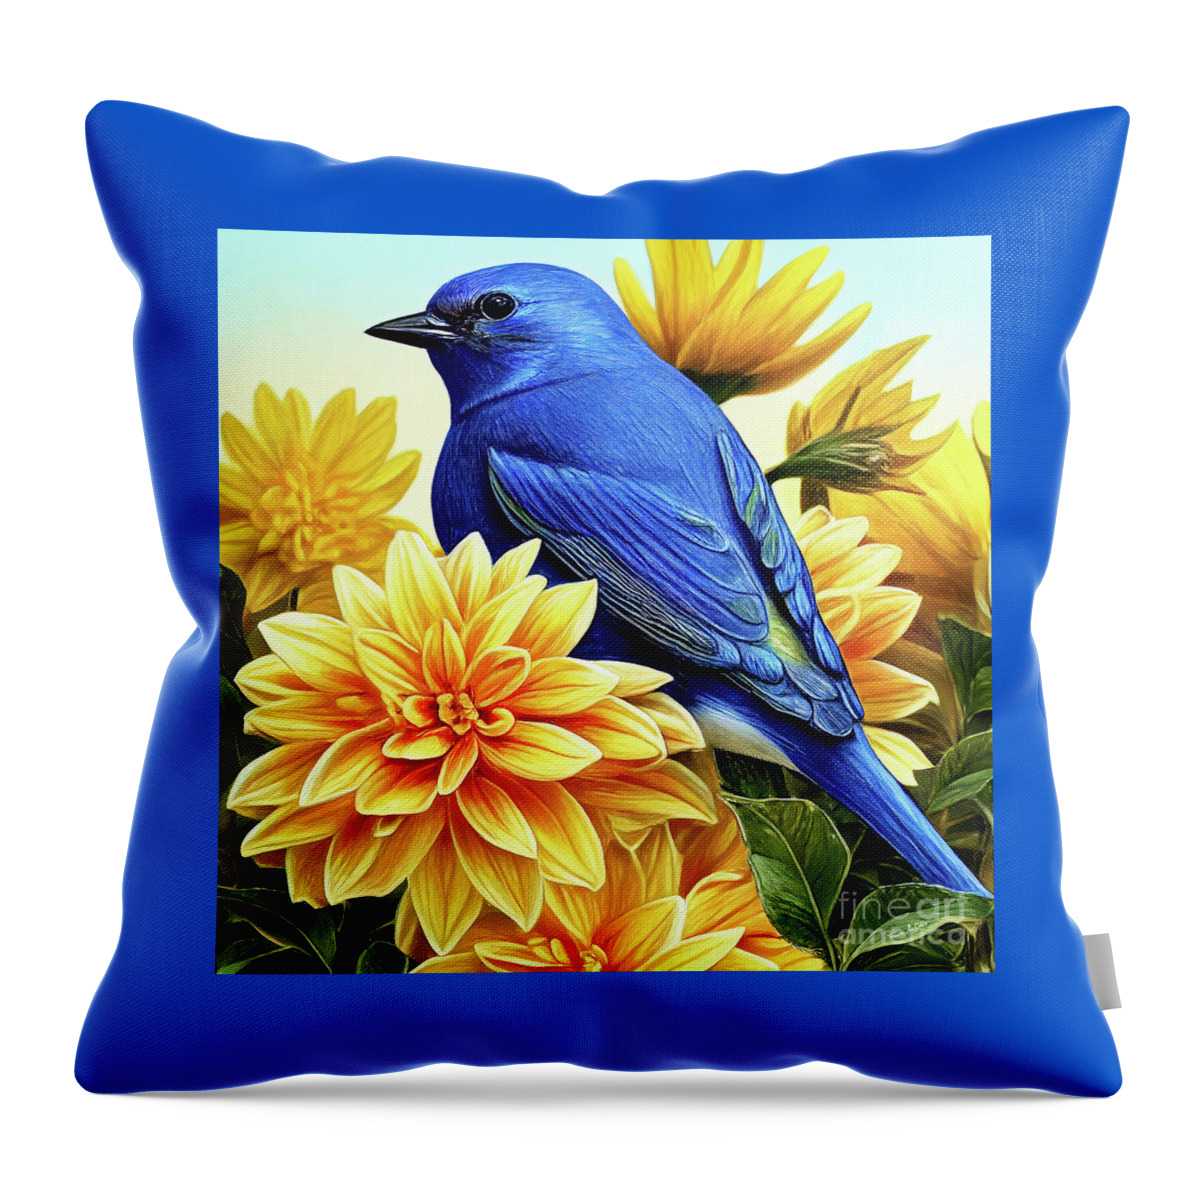 Eastern Bluebird Throw Pillow featuring the painting Bluebird In The Yellow Peonies by Tina LeCour